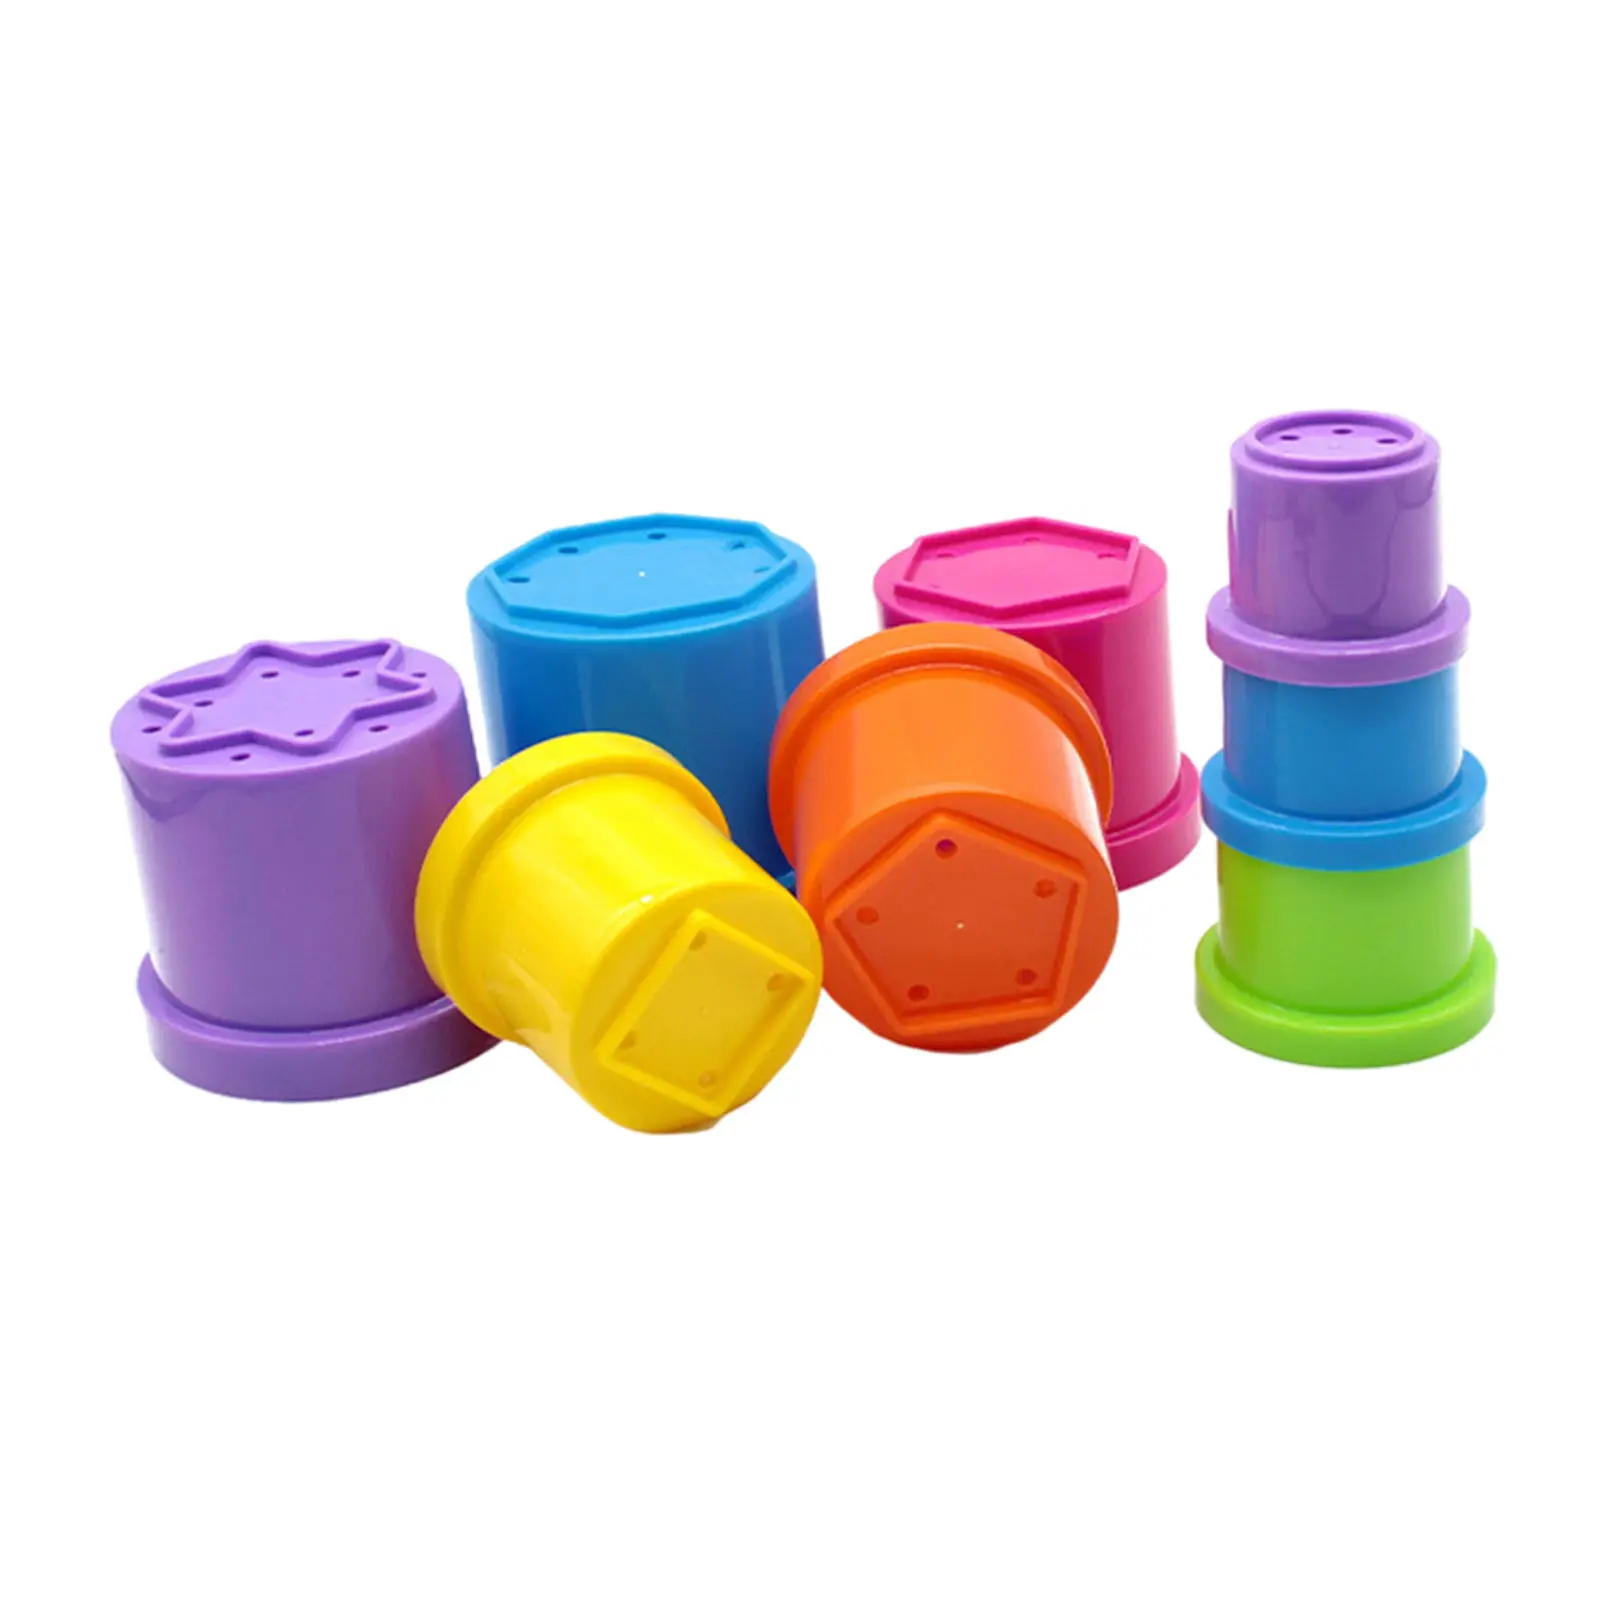 8Pcs Baby Bath Stacking Cup Toy Preschool Puzzle Water Games Stacking Tower for Bathtub Boys Girls 1 2 3 Year Old Kids Children